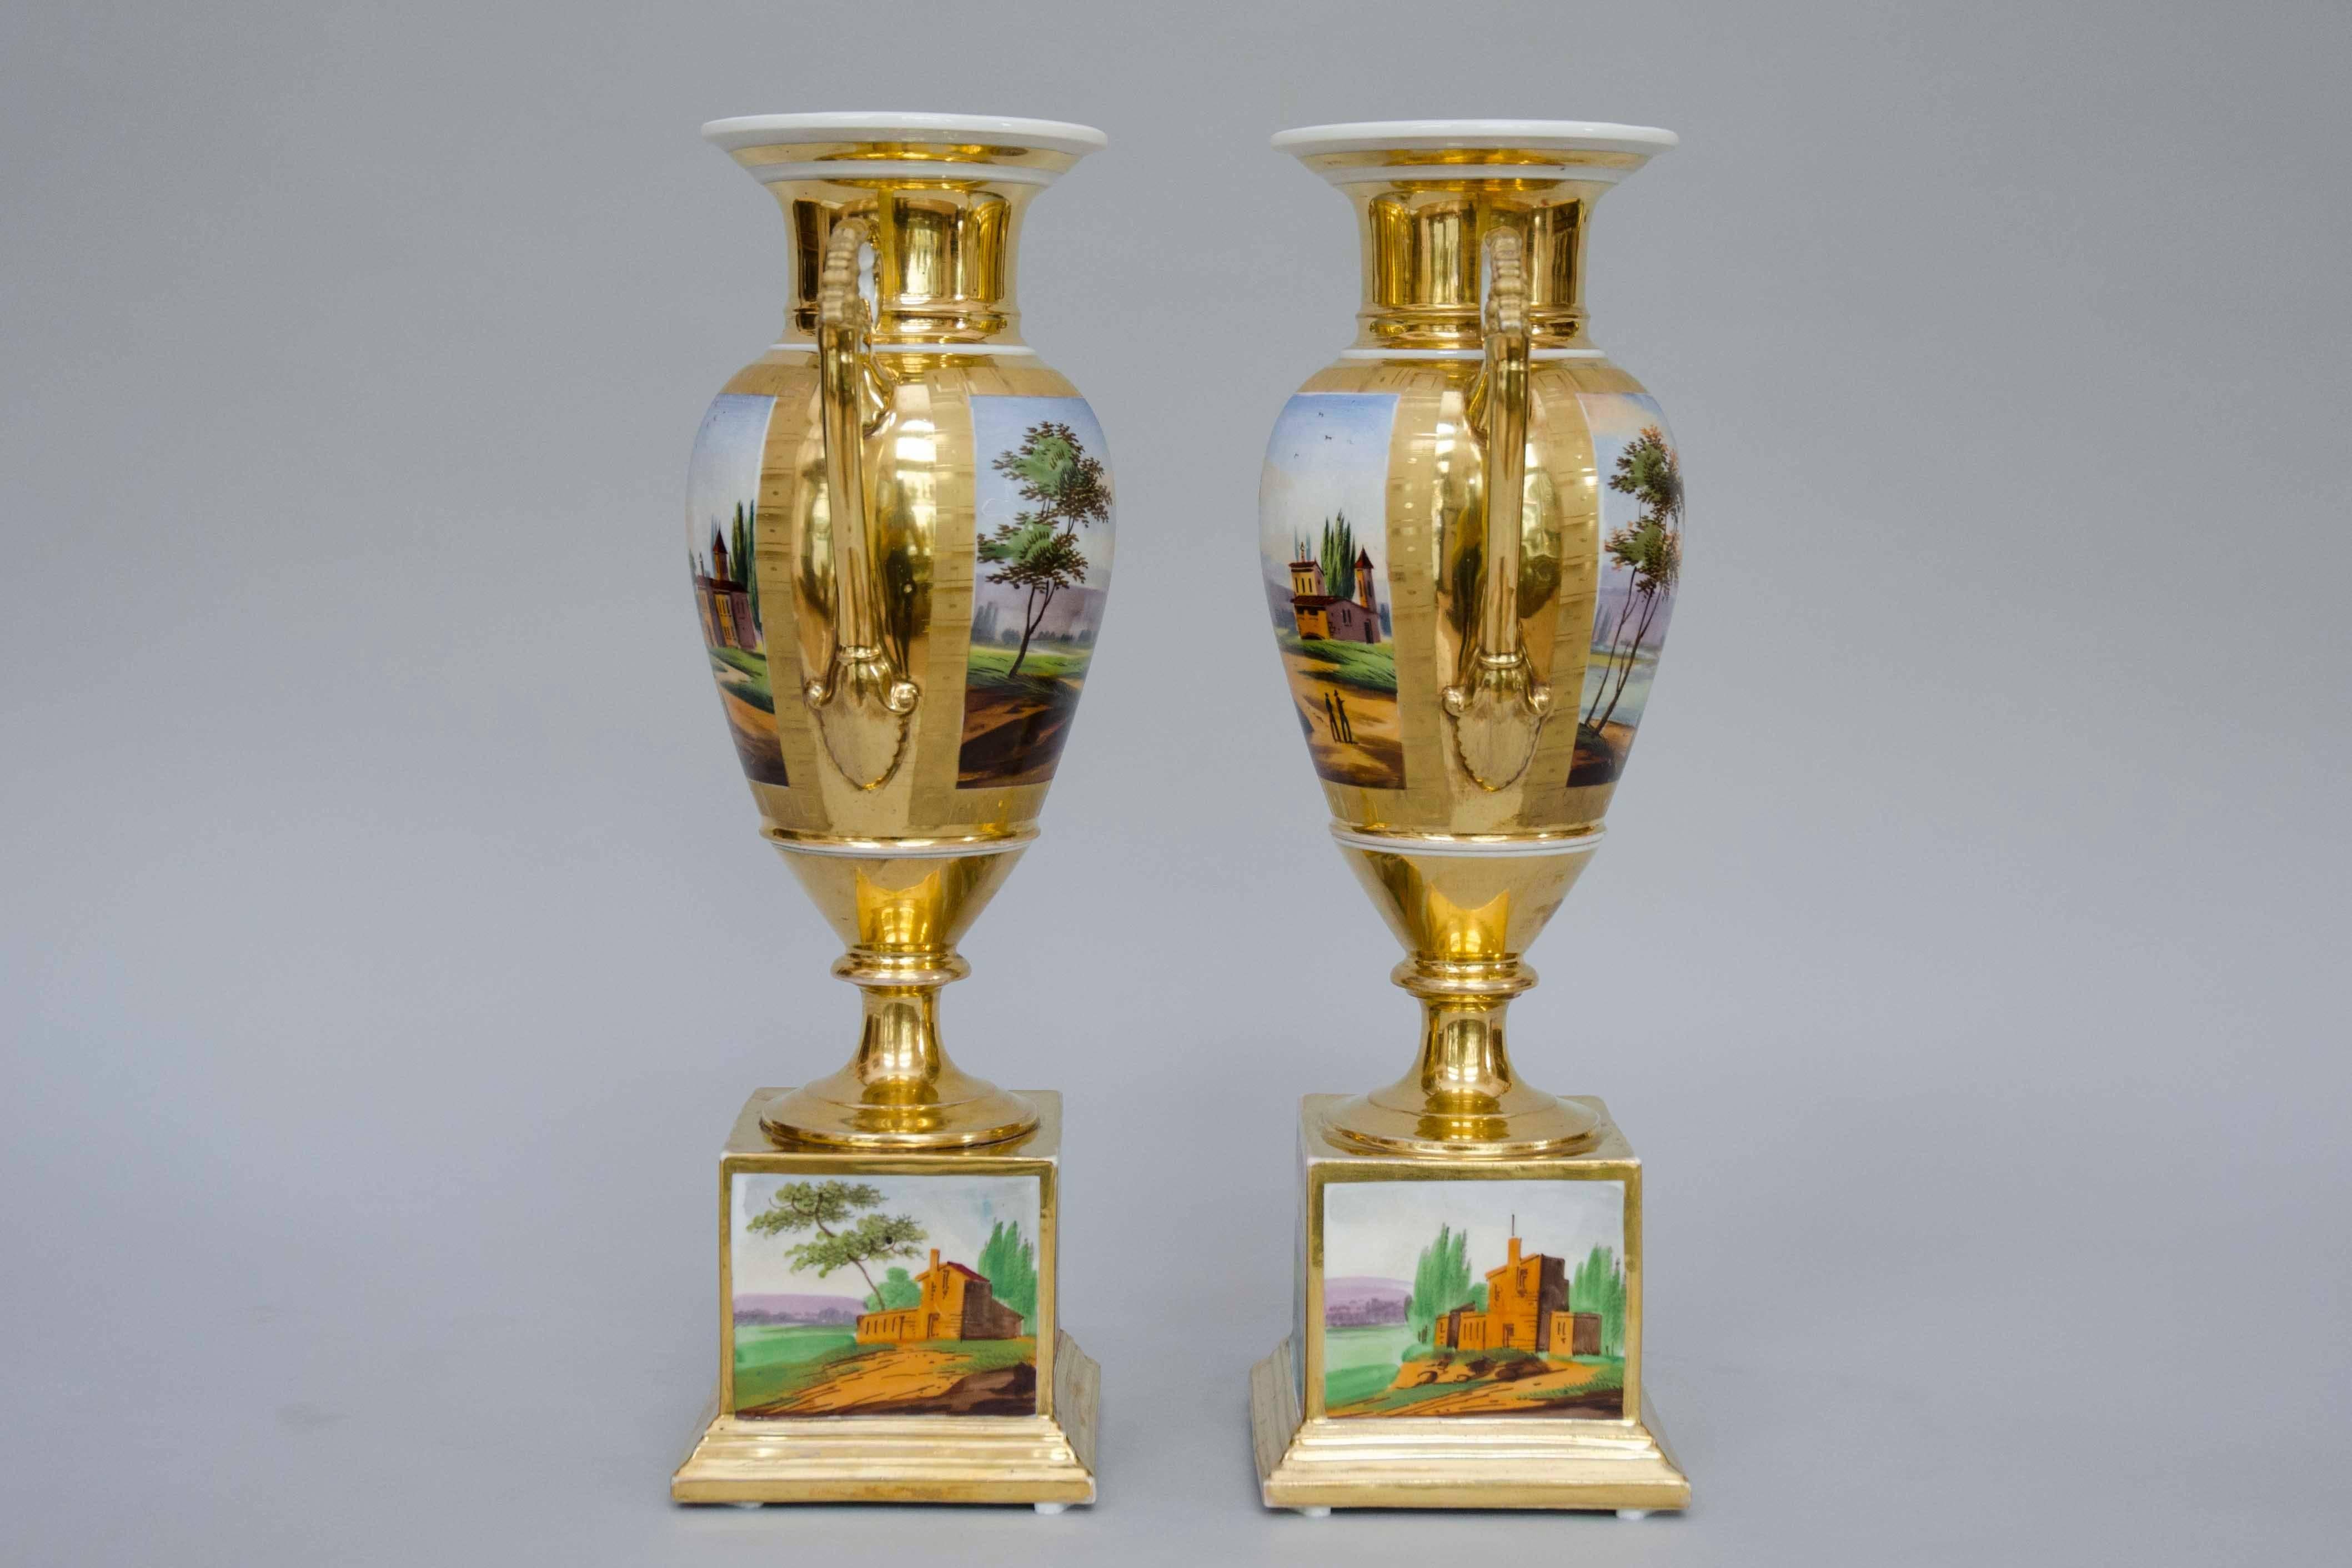 Porcelain 19th Century Squared Based Egg Shaped Vases with Italian Landscapes, Brussels For Sale